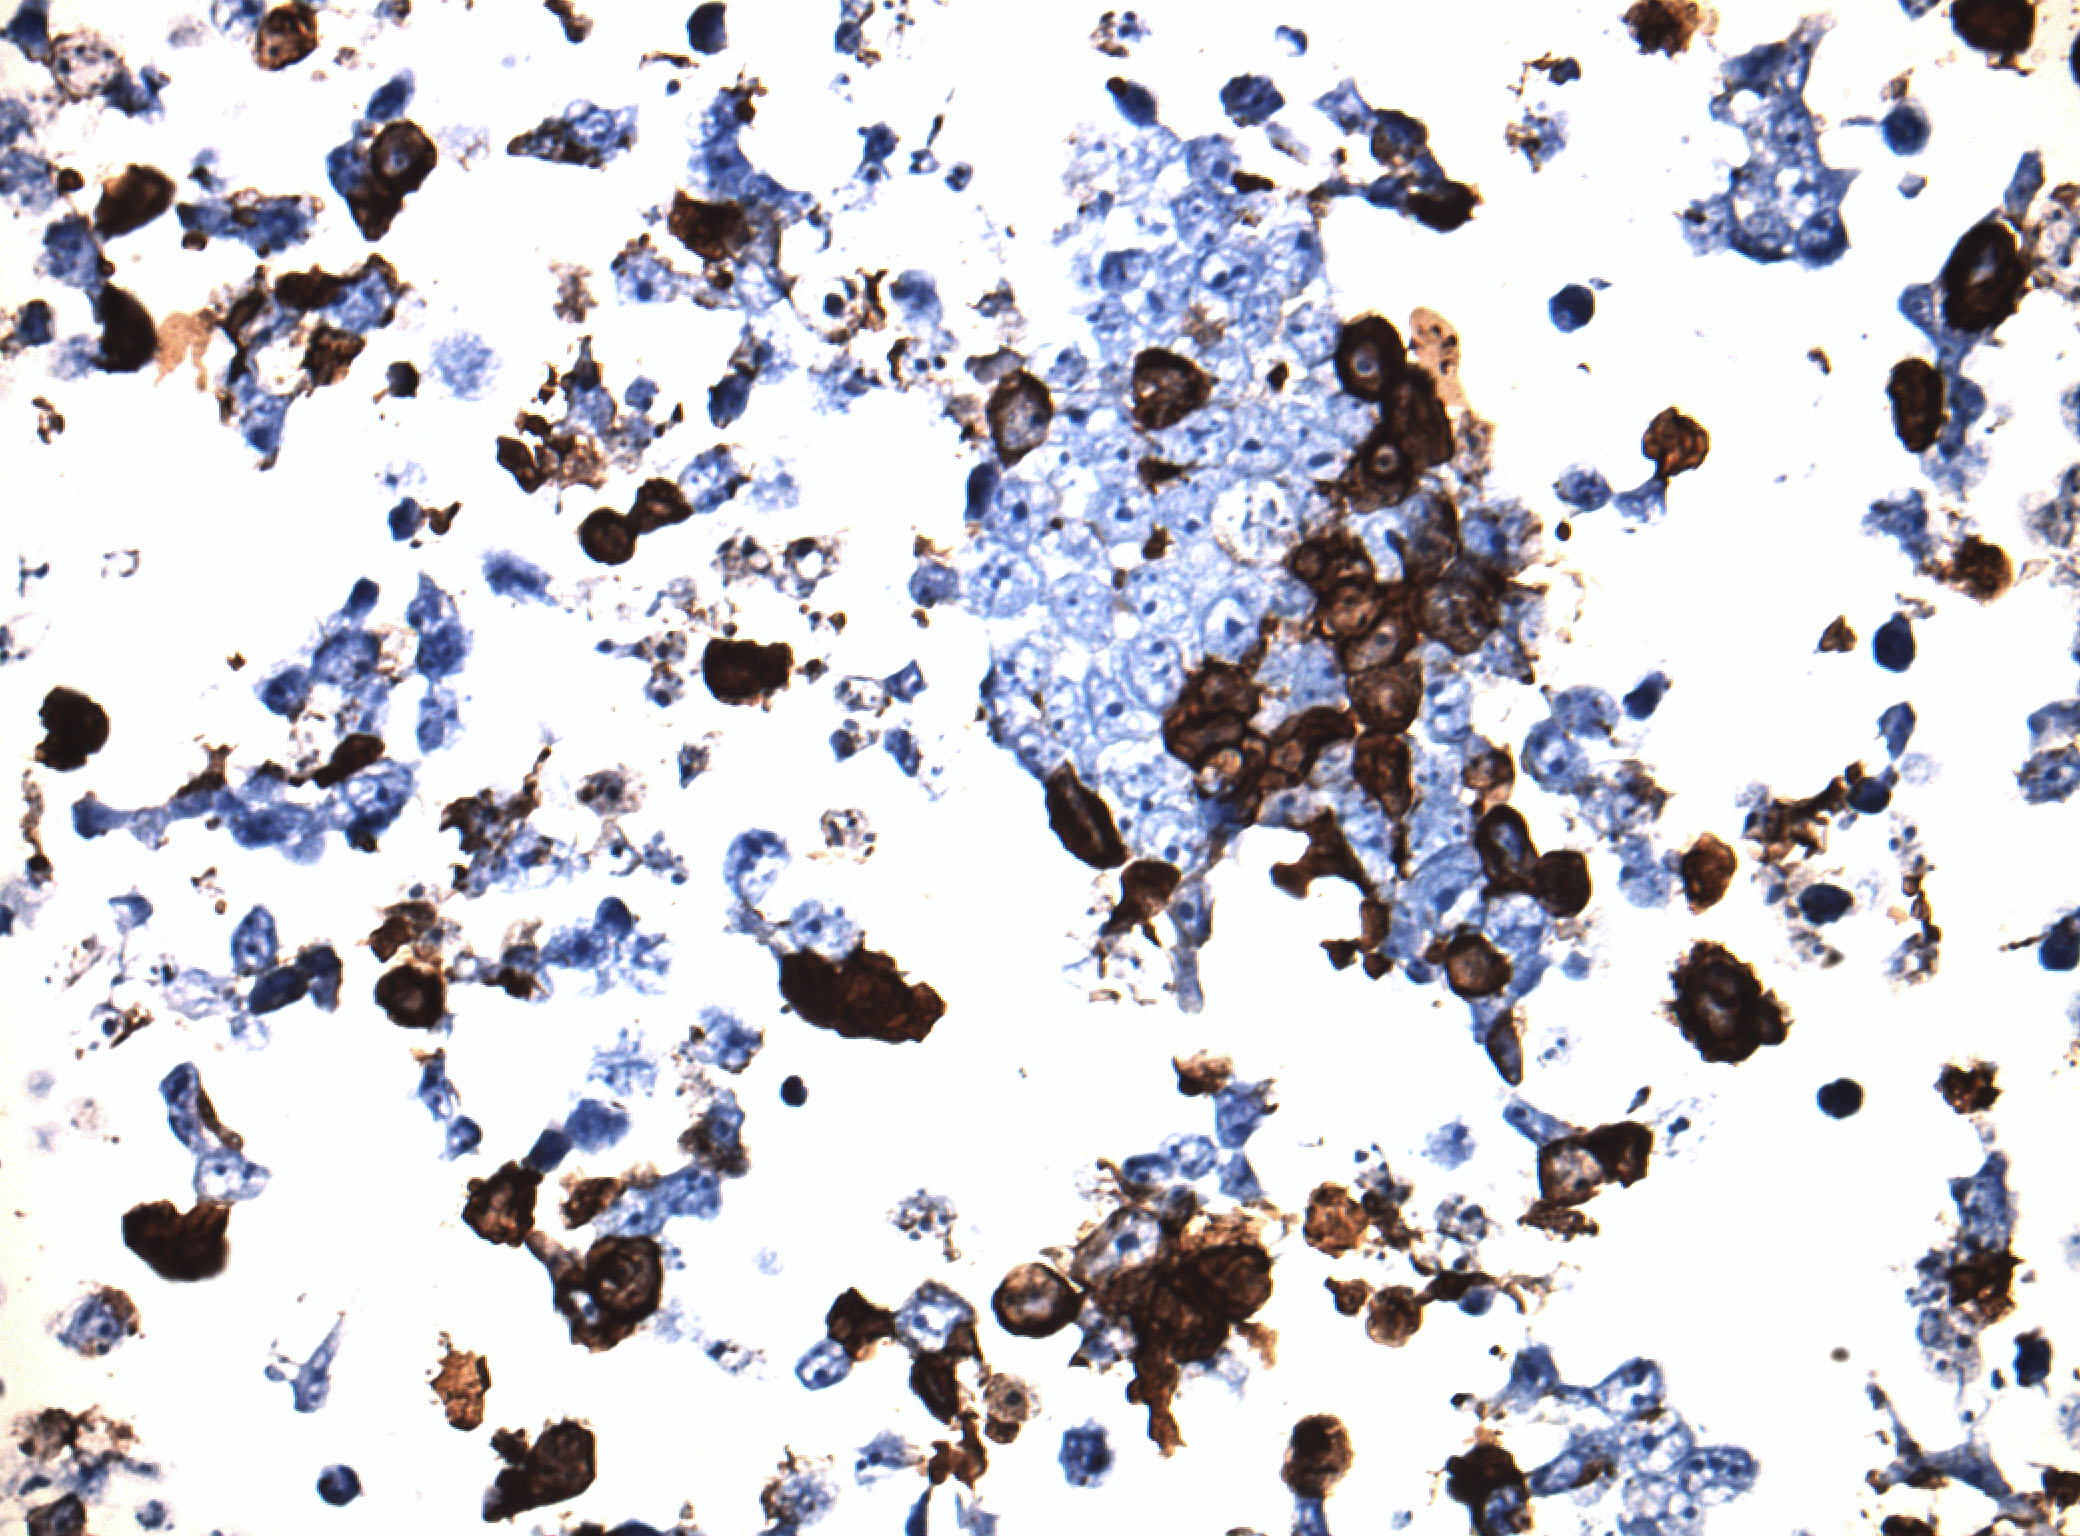 Immunohistology staining on AFAP1L2 overexpressed cytosection TS407706P5 with mouse anti DDK clone OTI11C3 C/N TA180144 at 1:400 dilution 4C O/N. Antibody staining was achieved with HIER Citrate pH6 , Polink1 with DAB chromogen detection kit (D11-18). Positive stain shown with the brown chromogen present. HEK293T cells were transfected with cDNA clone RC207706, 5 micron sections, 40x magnification